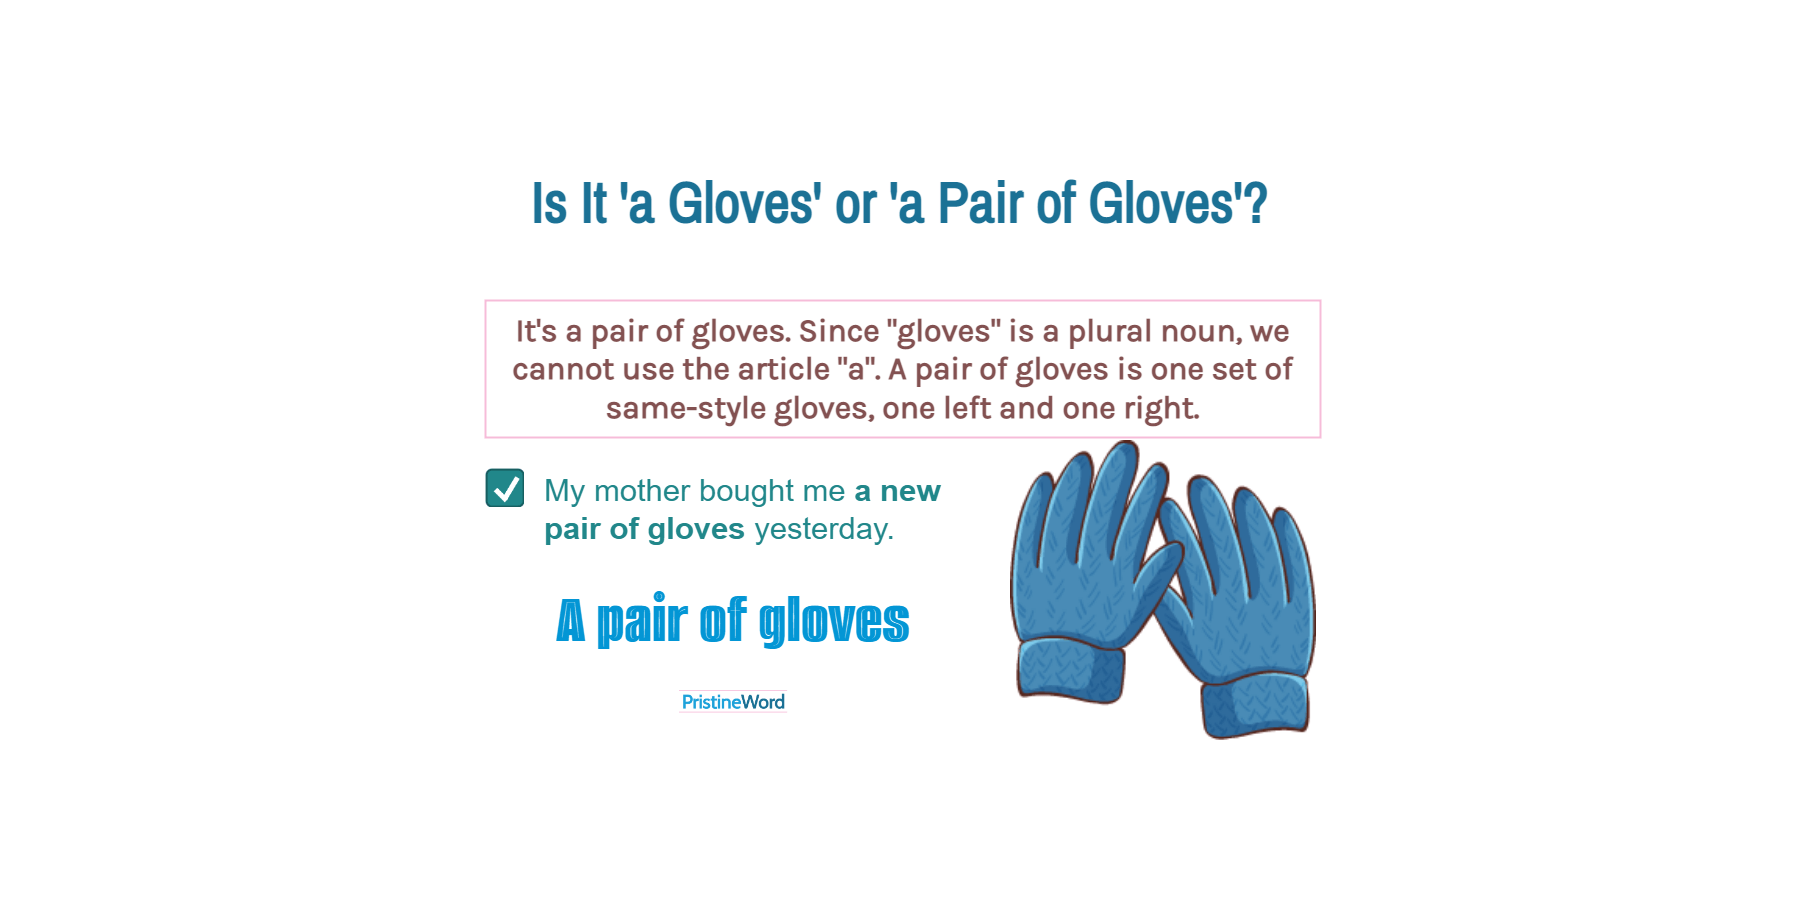 Is It ‘a Gloves’ or ‘a Pair of Gloves’?